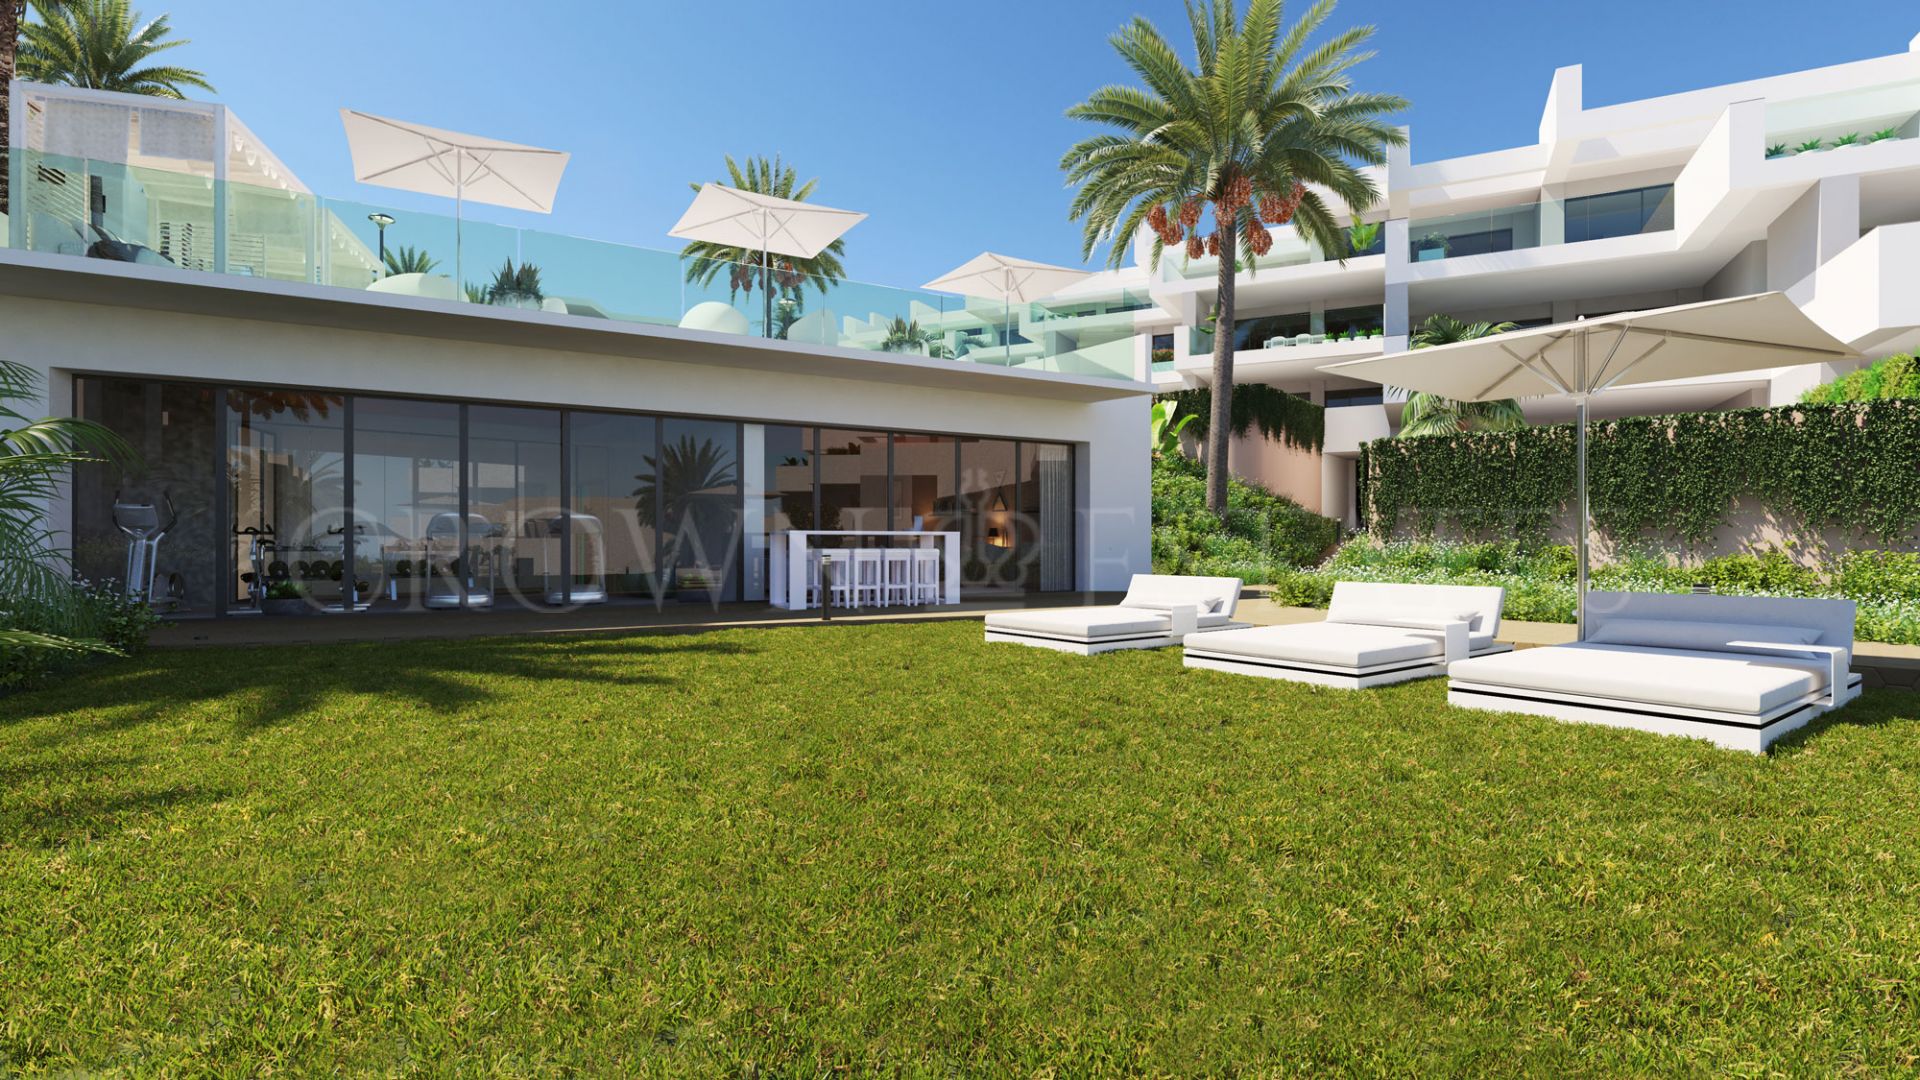 Pure South, contemporary apartments with sea views for a resort-style living in La Duquesa area